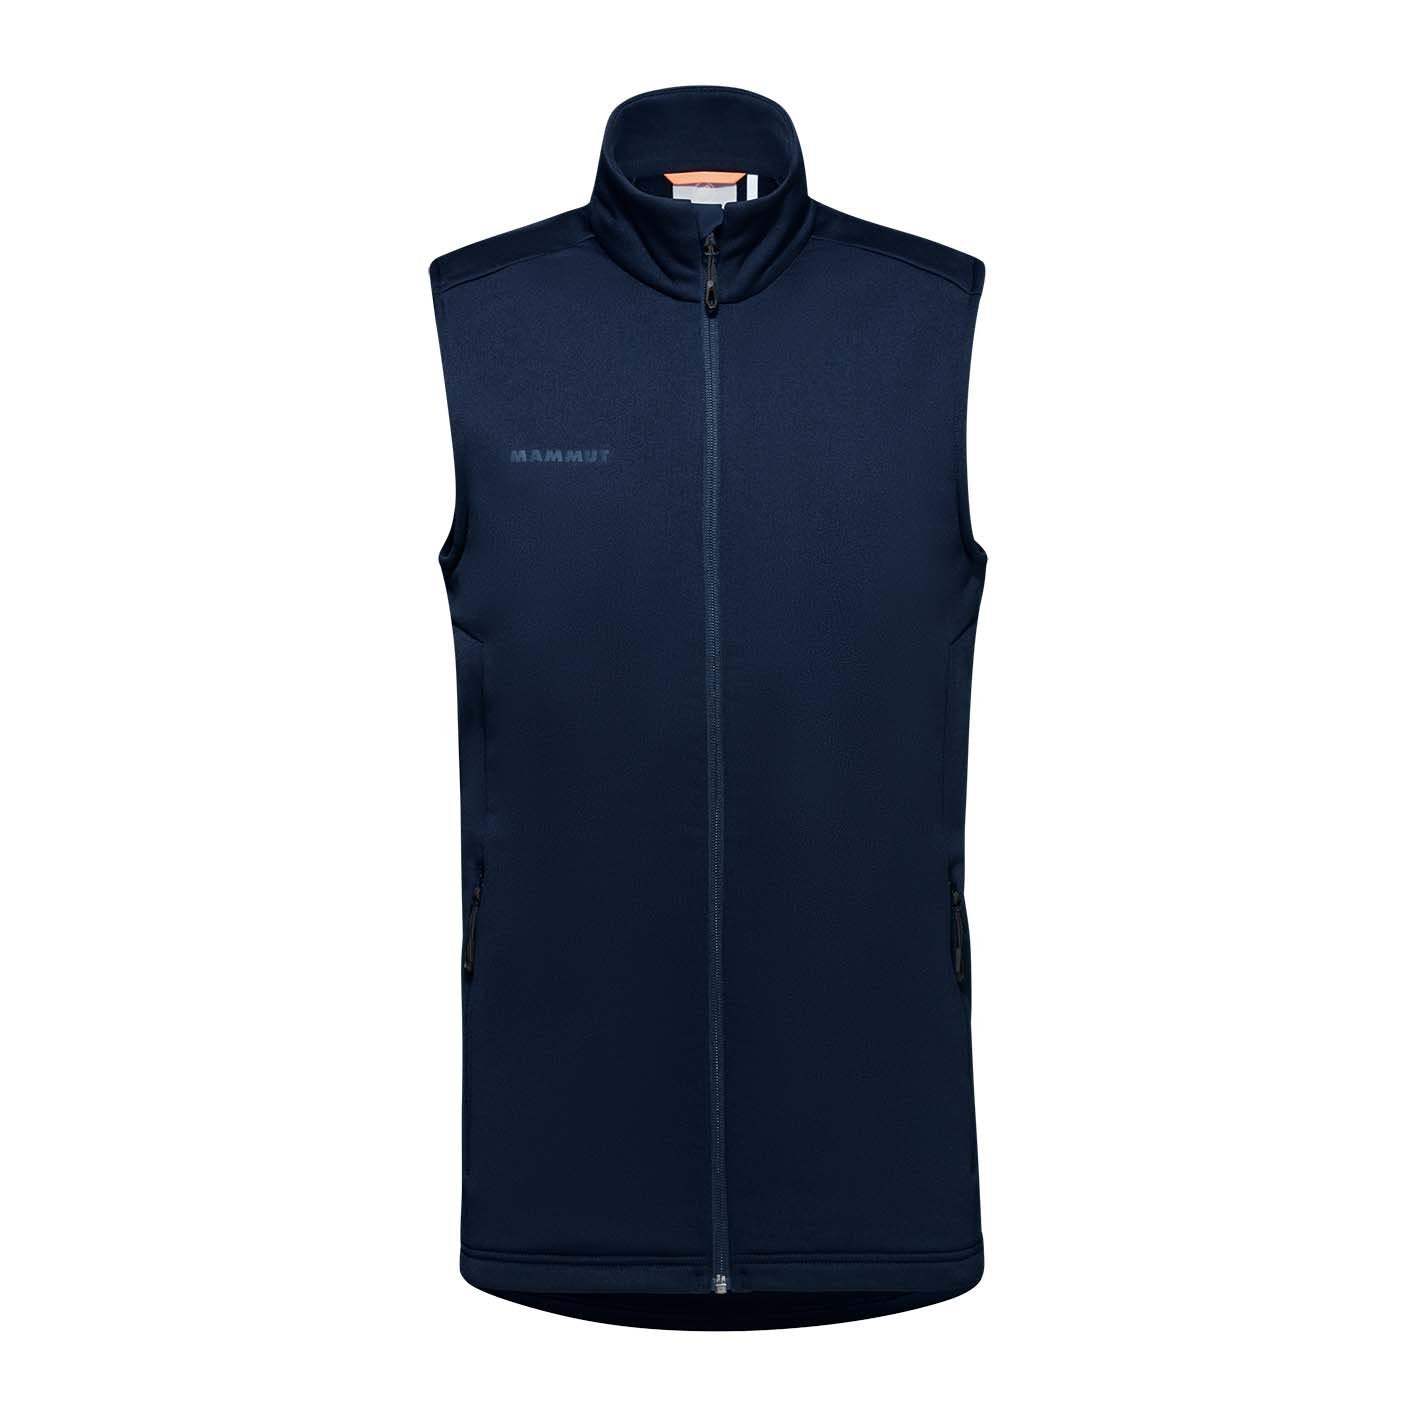 Men's Corporate Softshell Vest by Mammut - The Luxury Promotional Gifts Company Limited